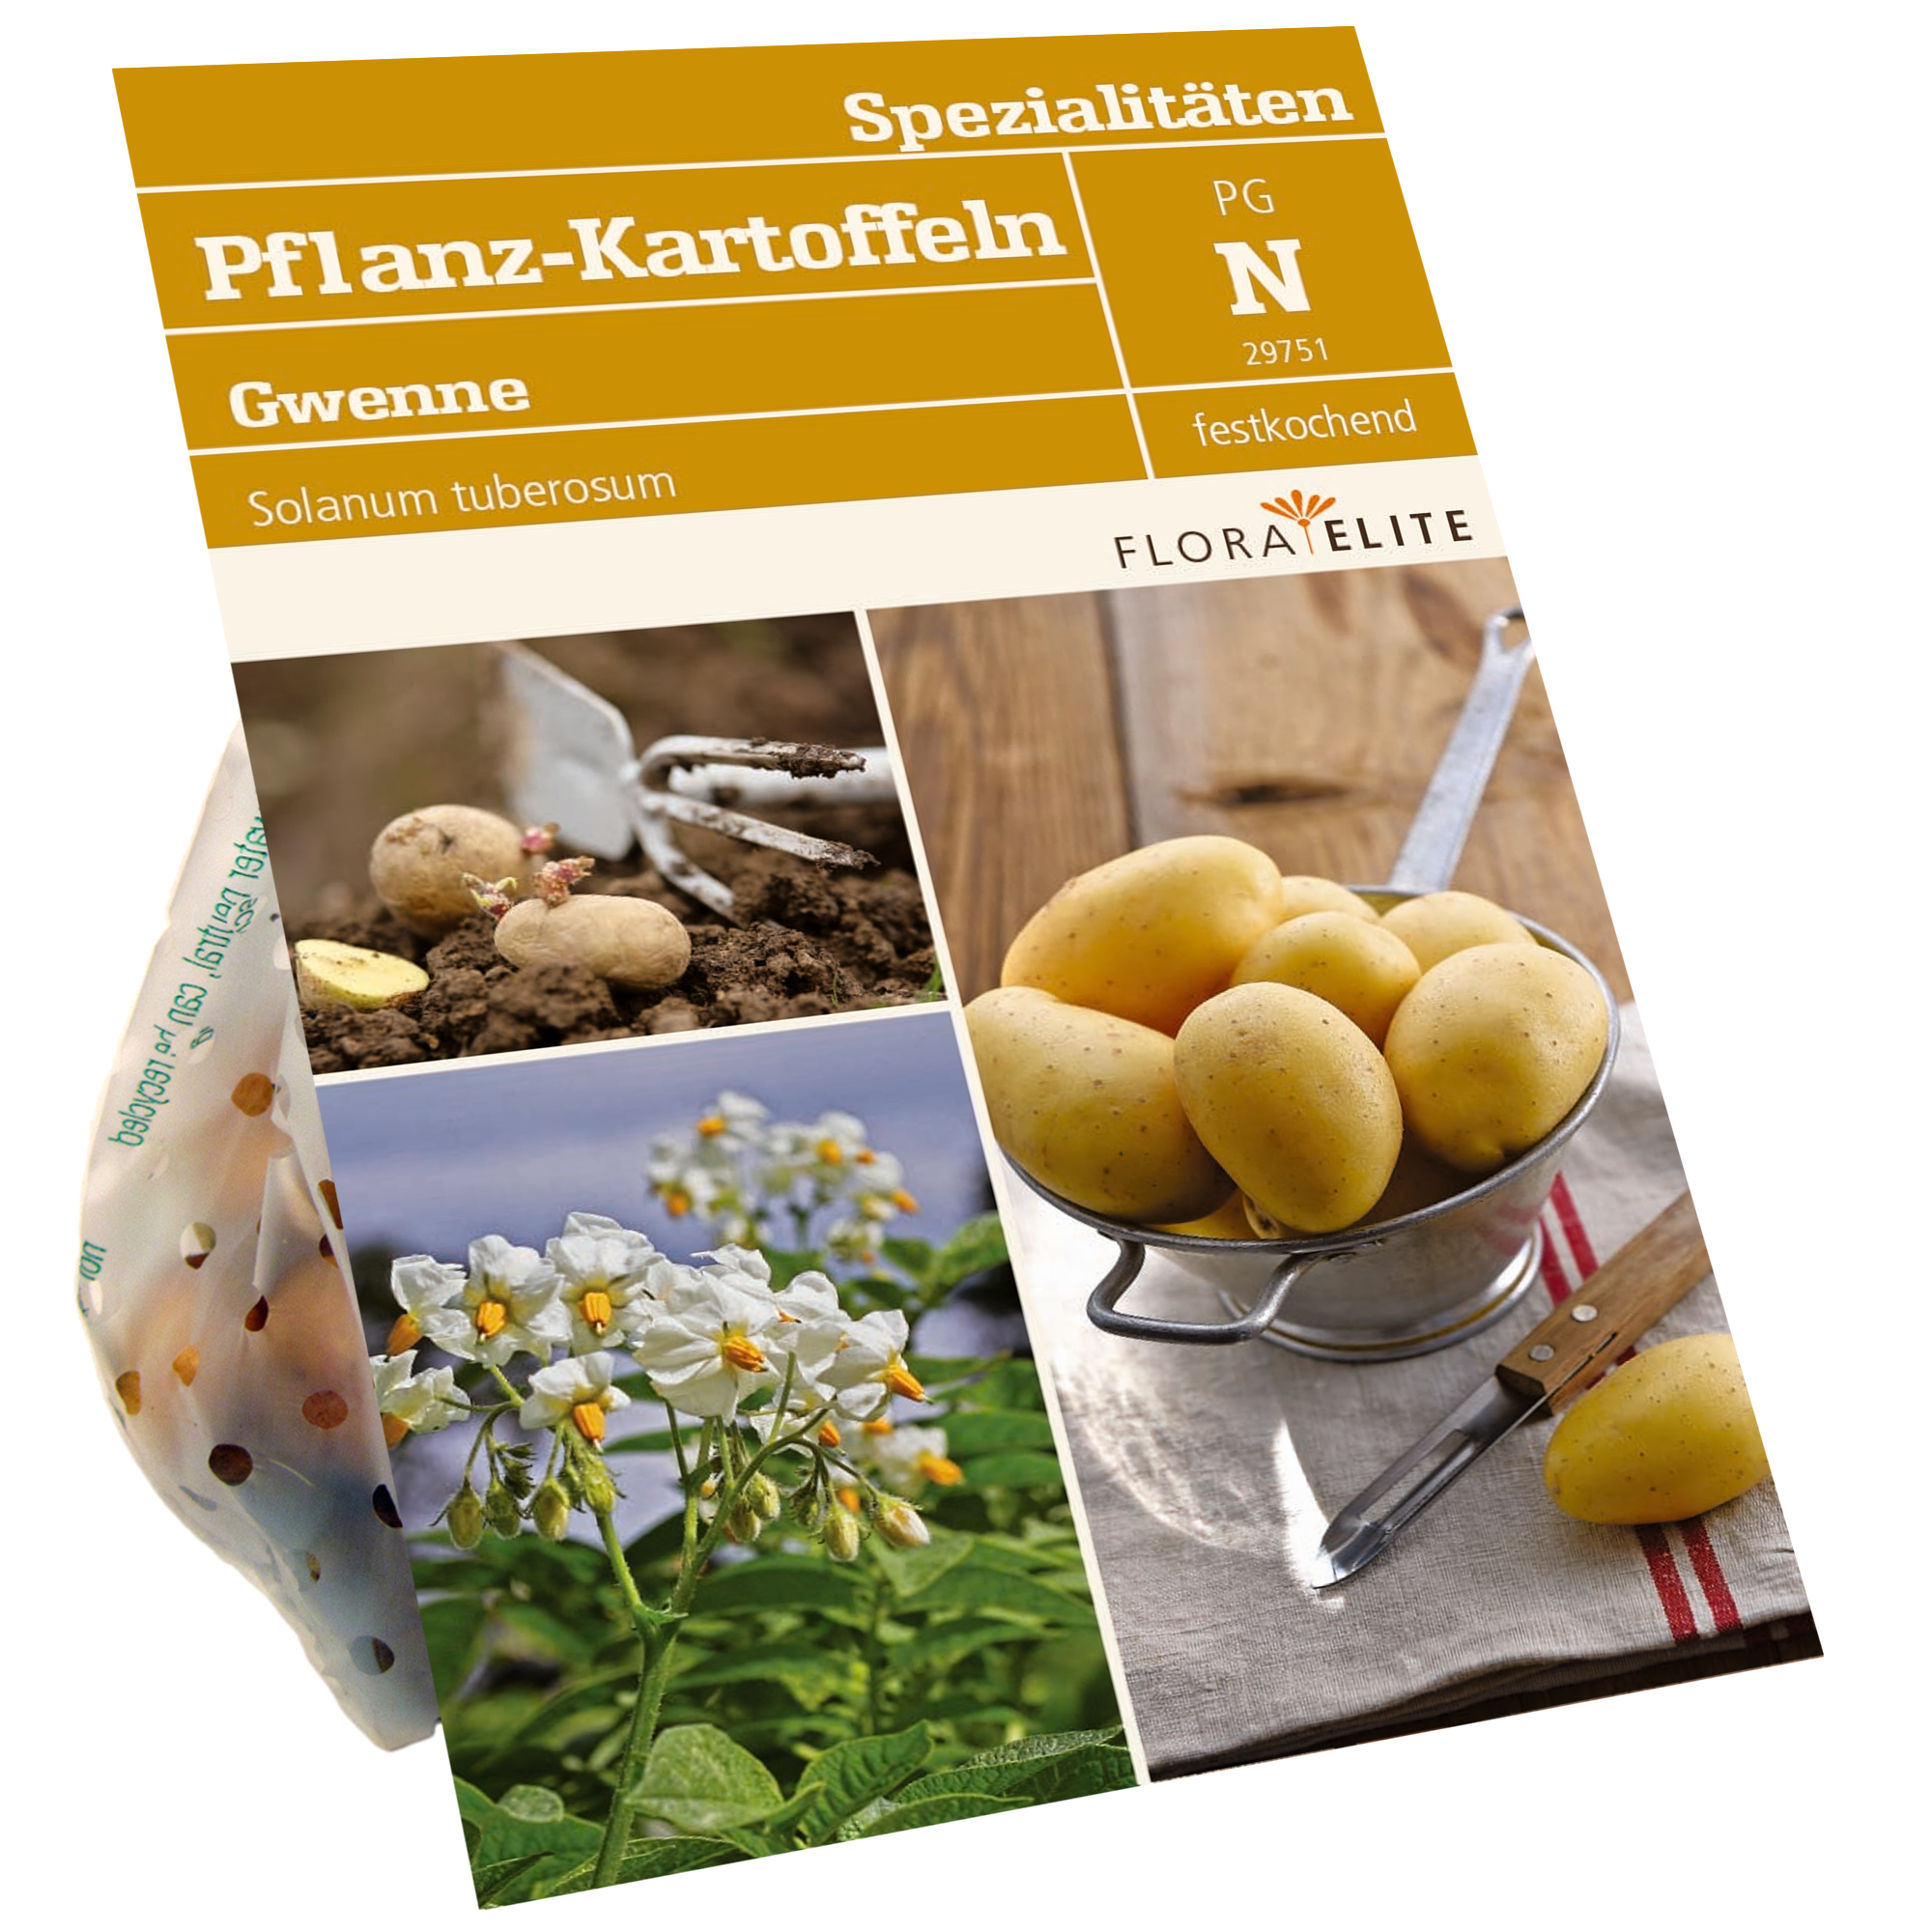 Pflanzkartoffeln 'Gwenne' 500 g + product picture